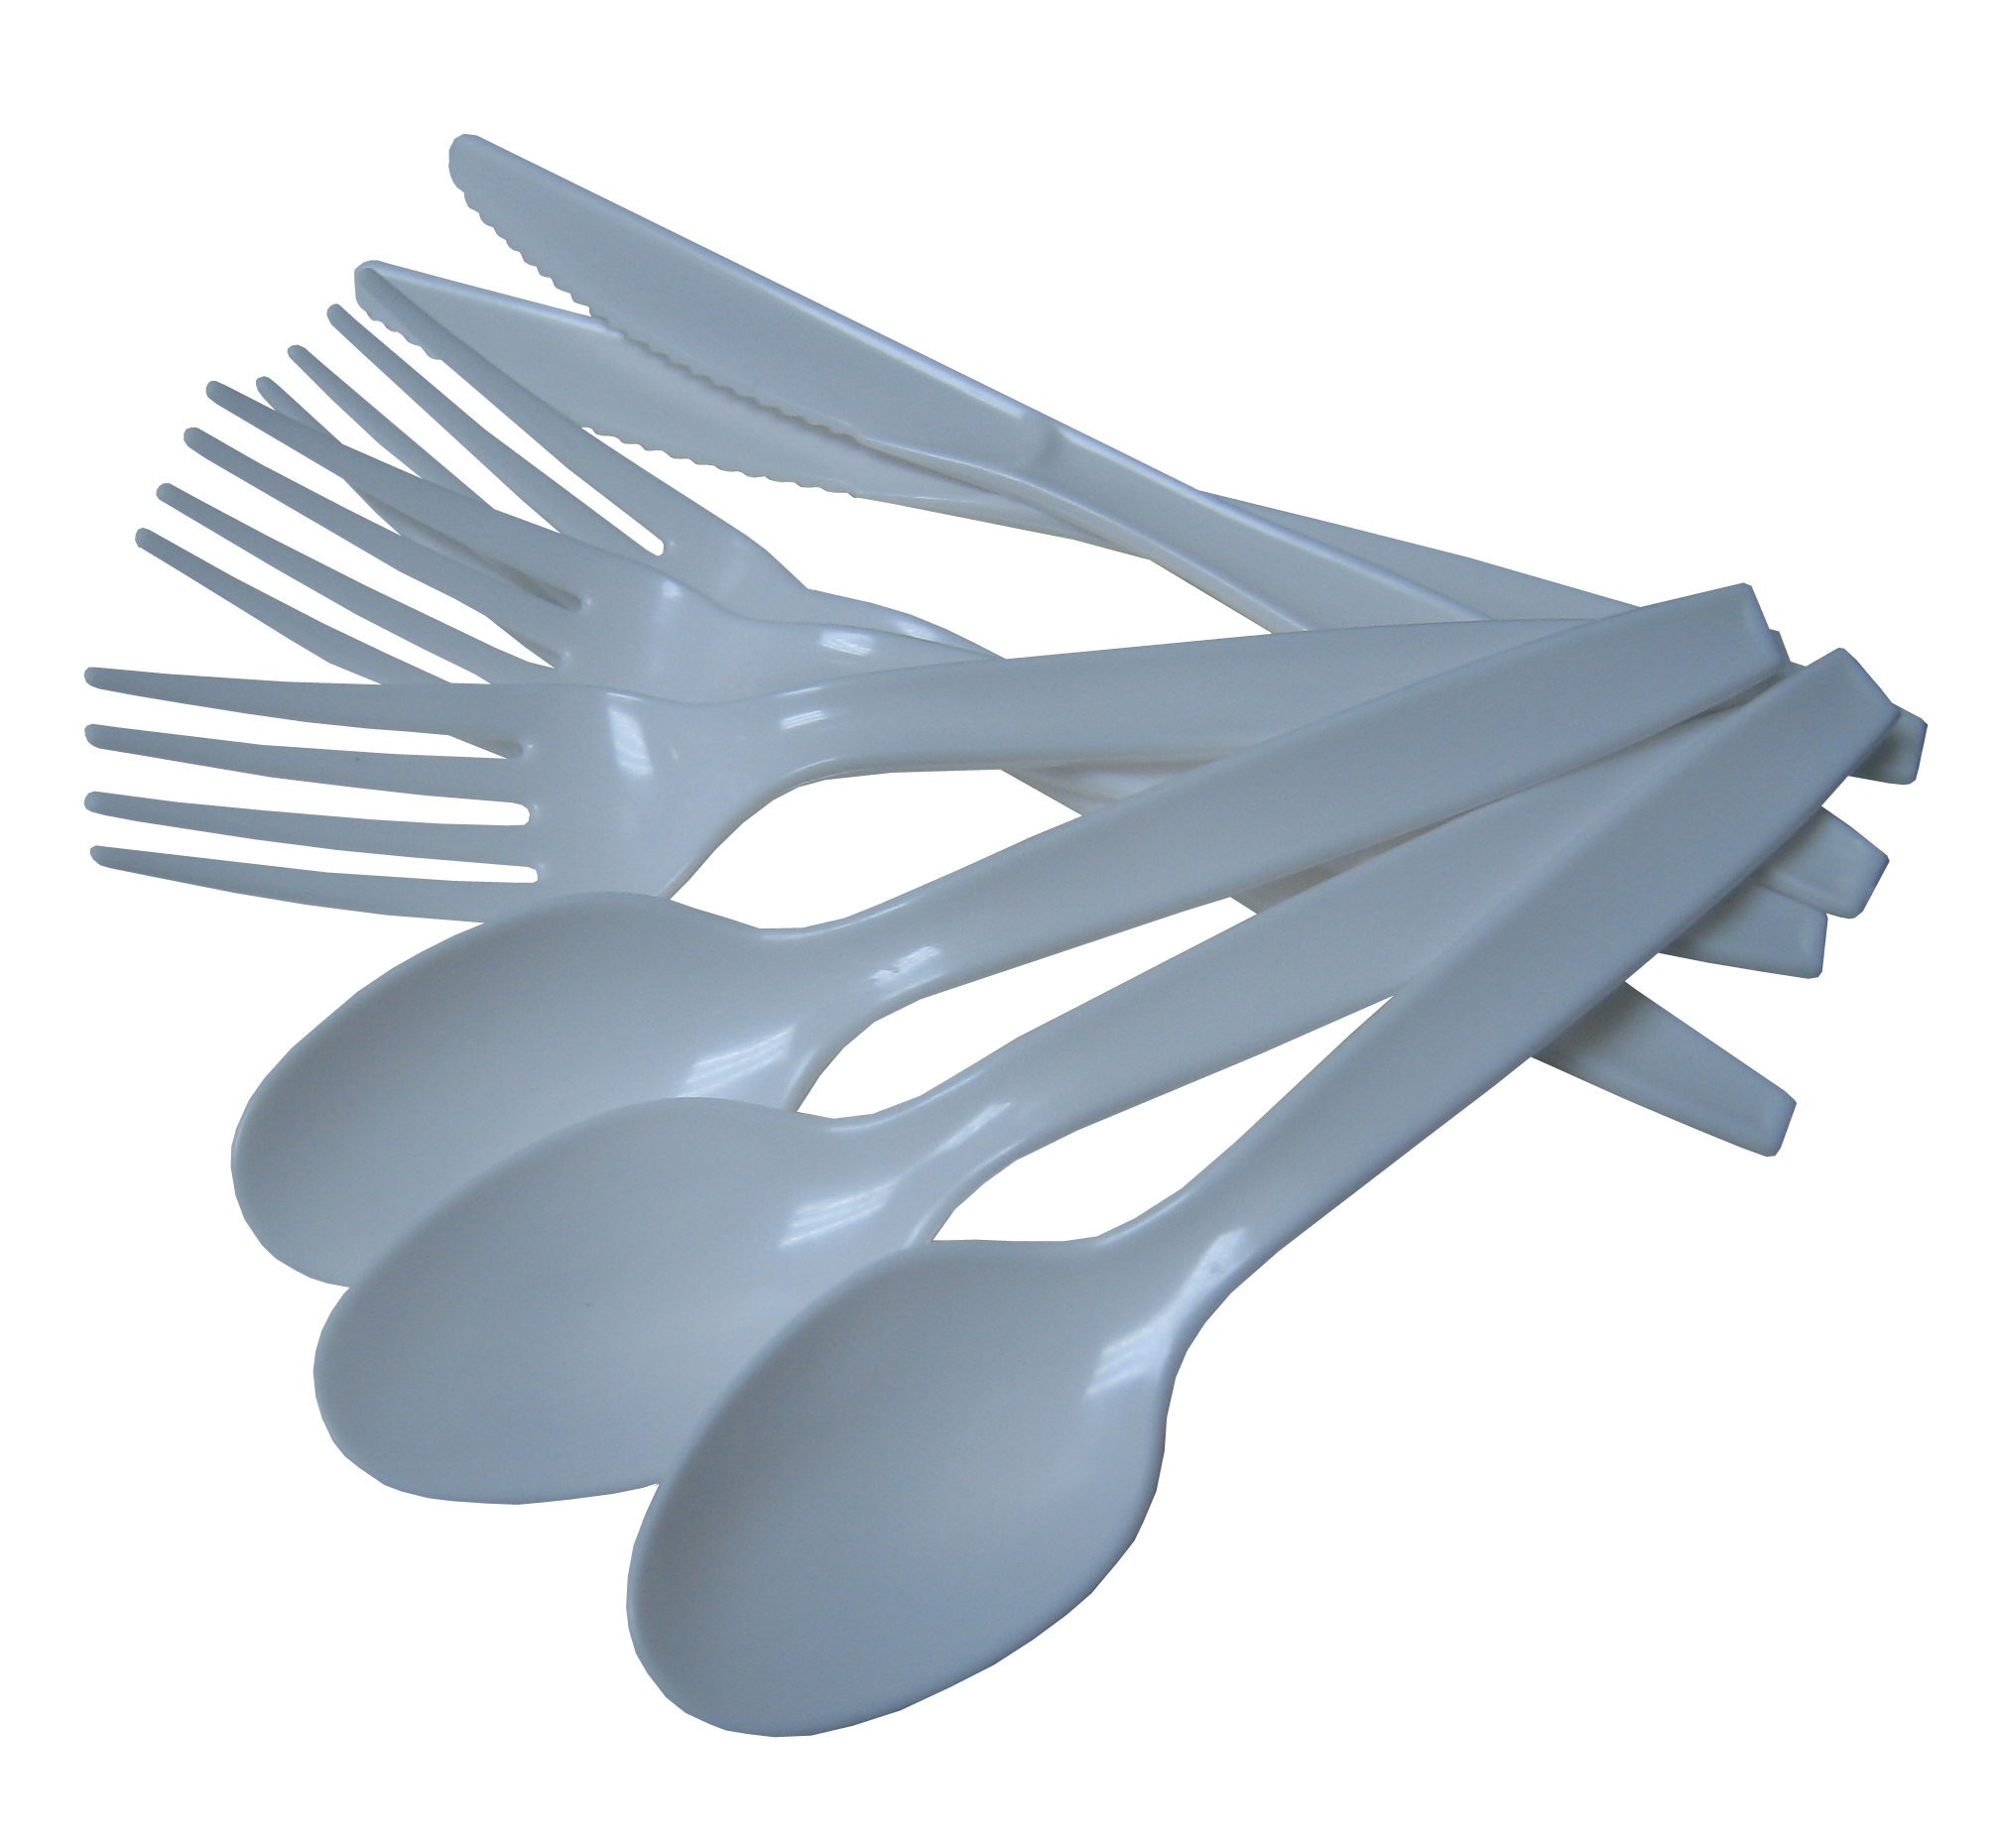 https://upload.wikimedia.org/wikipedia/commons/7/73/Plasticware_-_isolated.png